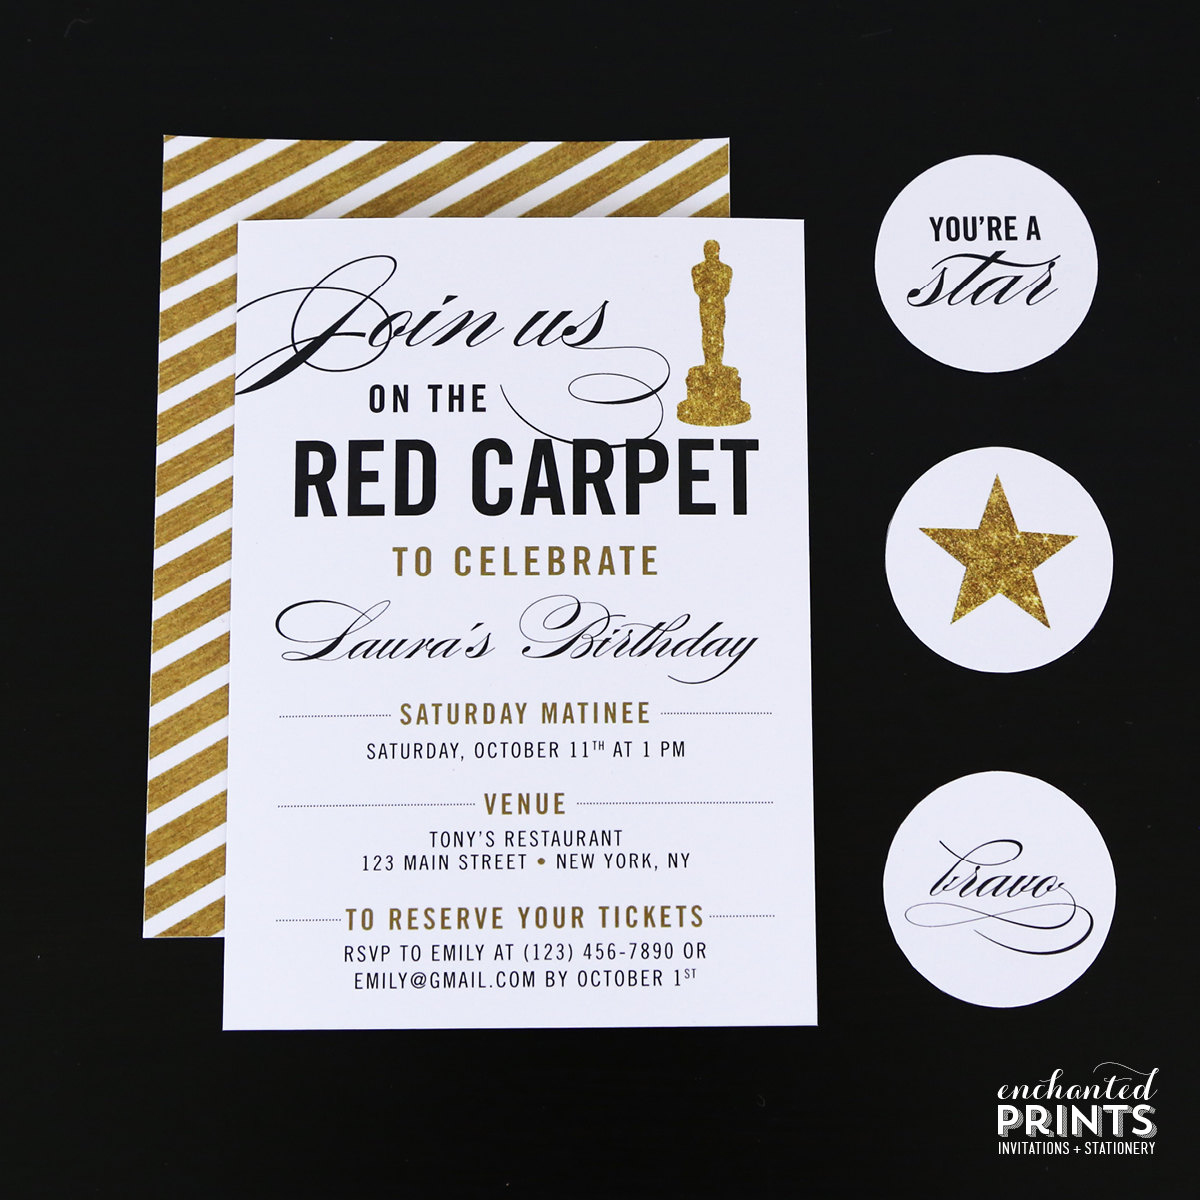 Red Carpet Invitation Template Free Unique Red Carpet Birthday Party Invitation Awards by Enchantedprints